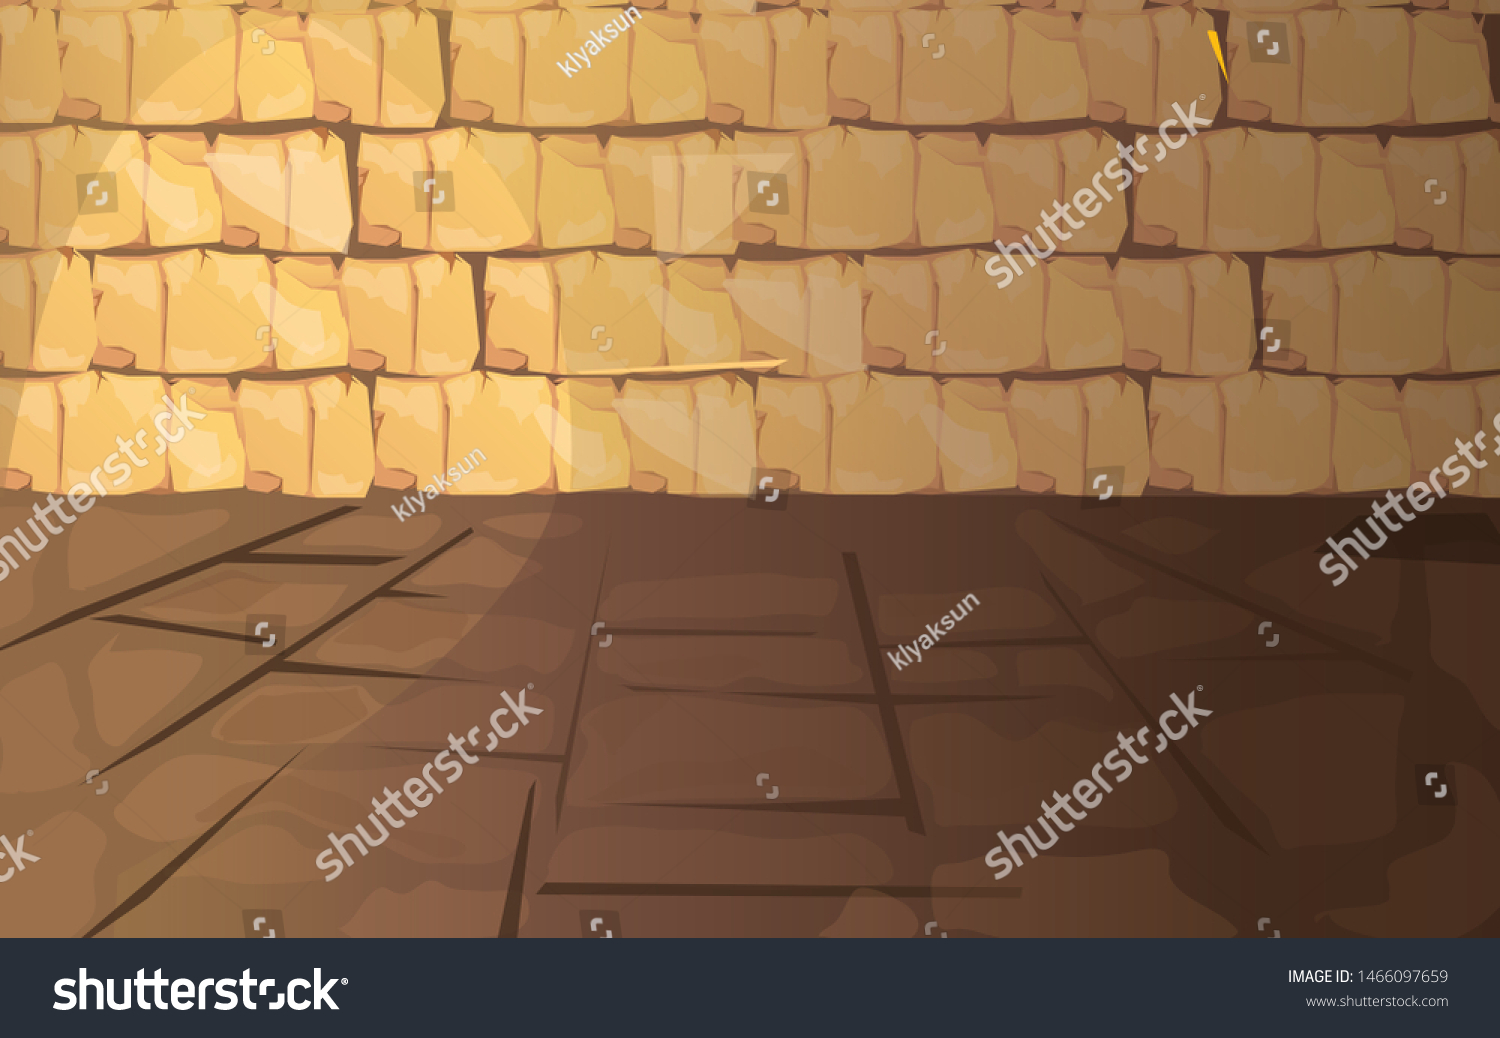 SVG of Ancient Egypt empty pharaoh tomb or temple room cartoon vector illustration. Egyptian pyramid interior with walls, floor of stone or sand blocks, background for game design svg